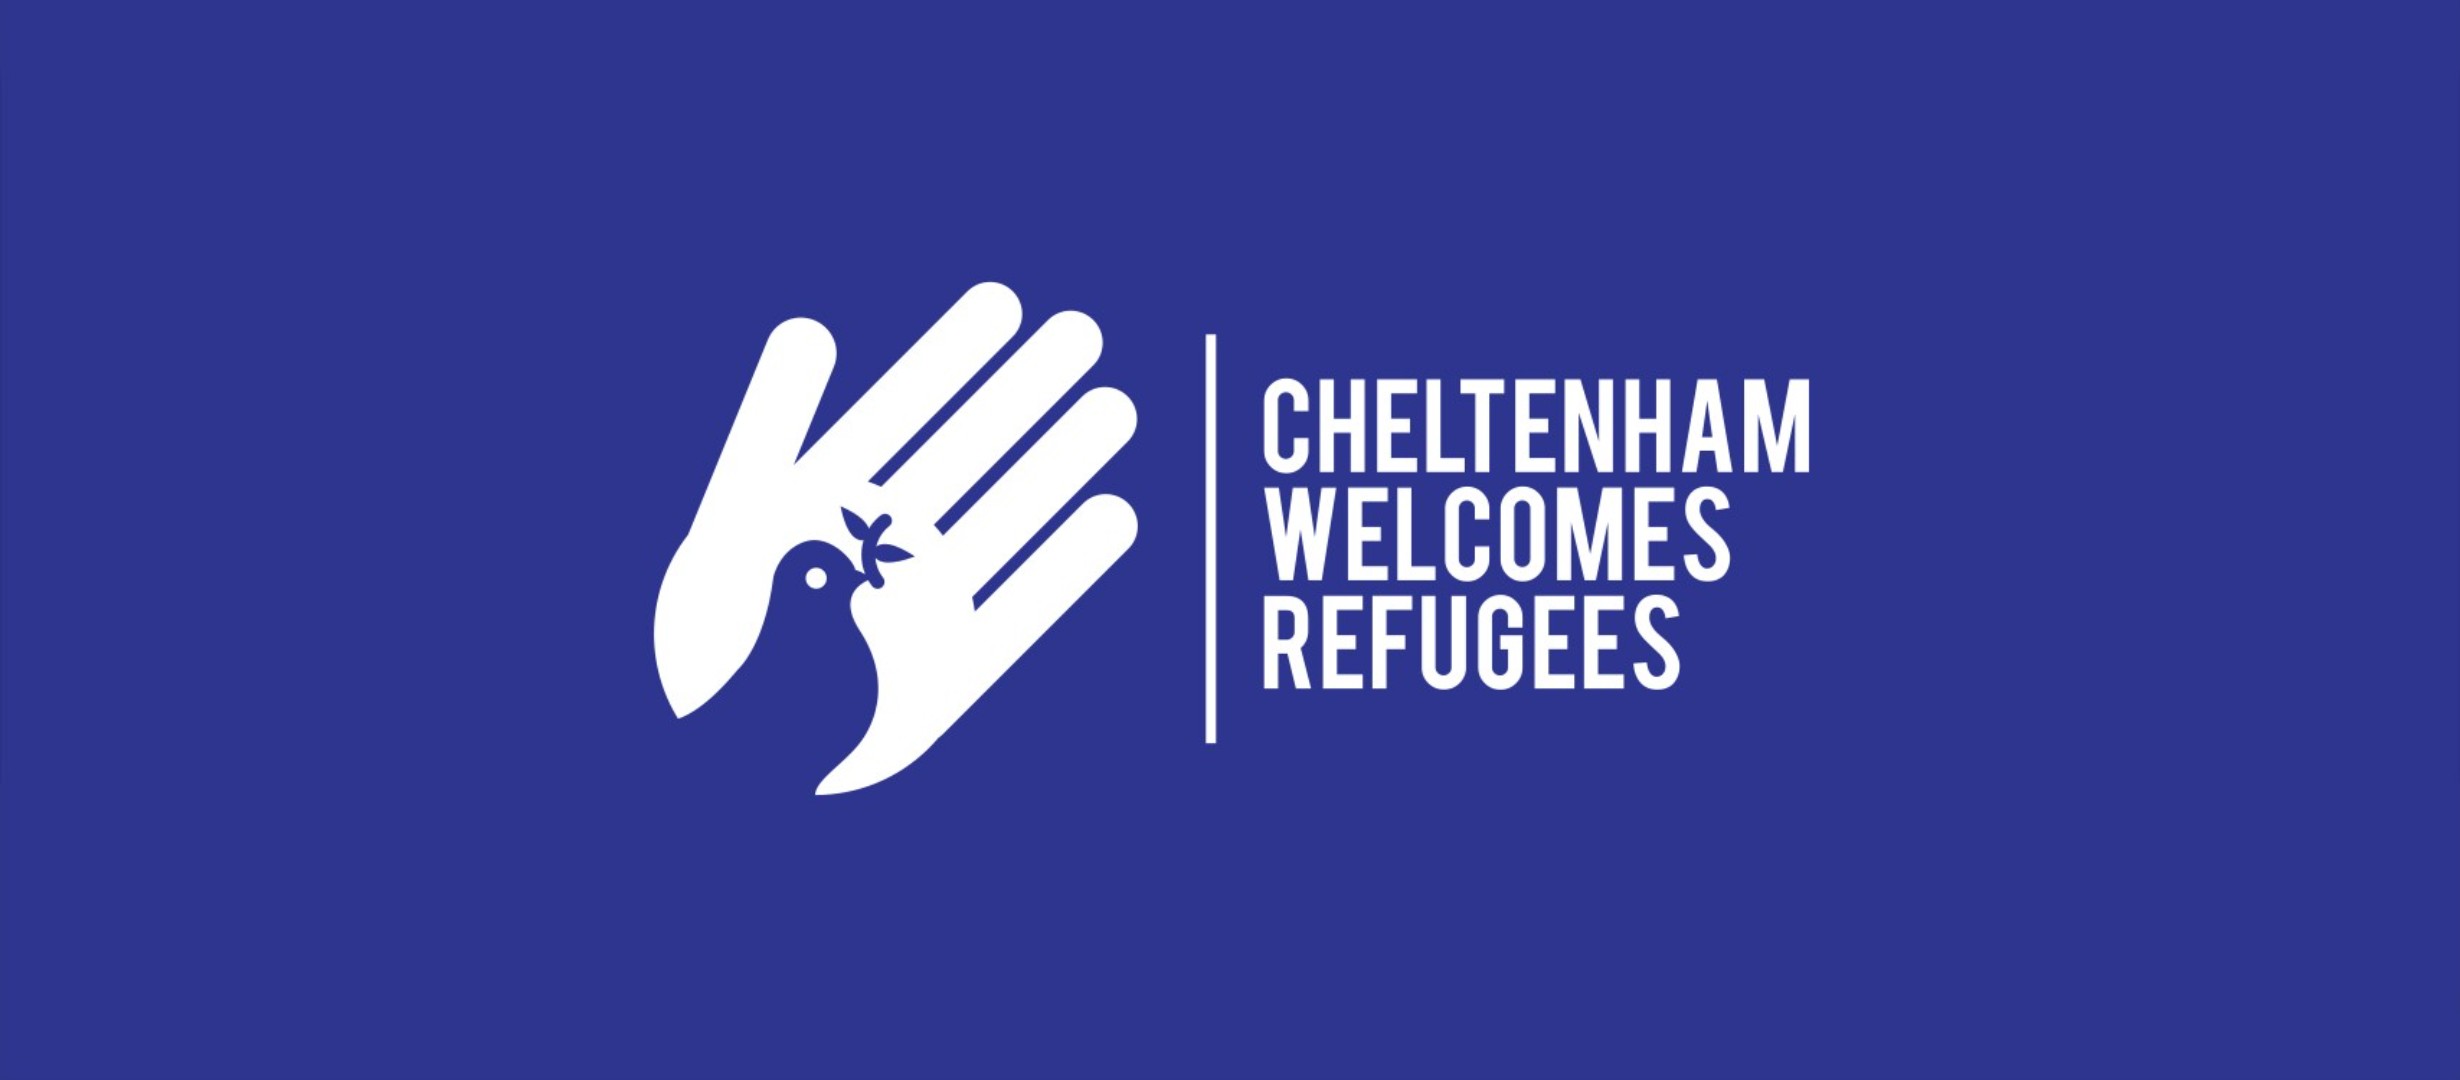 Cheltenham welcomes refugees logo with text that reads 'cheltenham welcomes refugees'